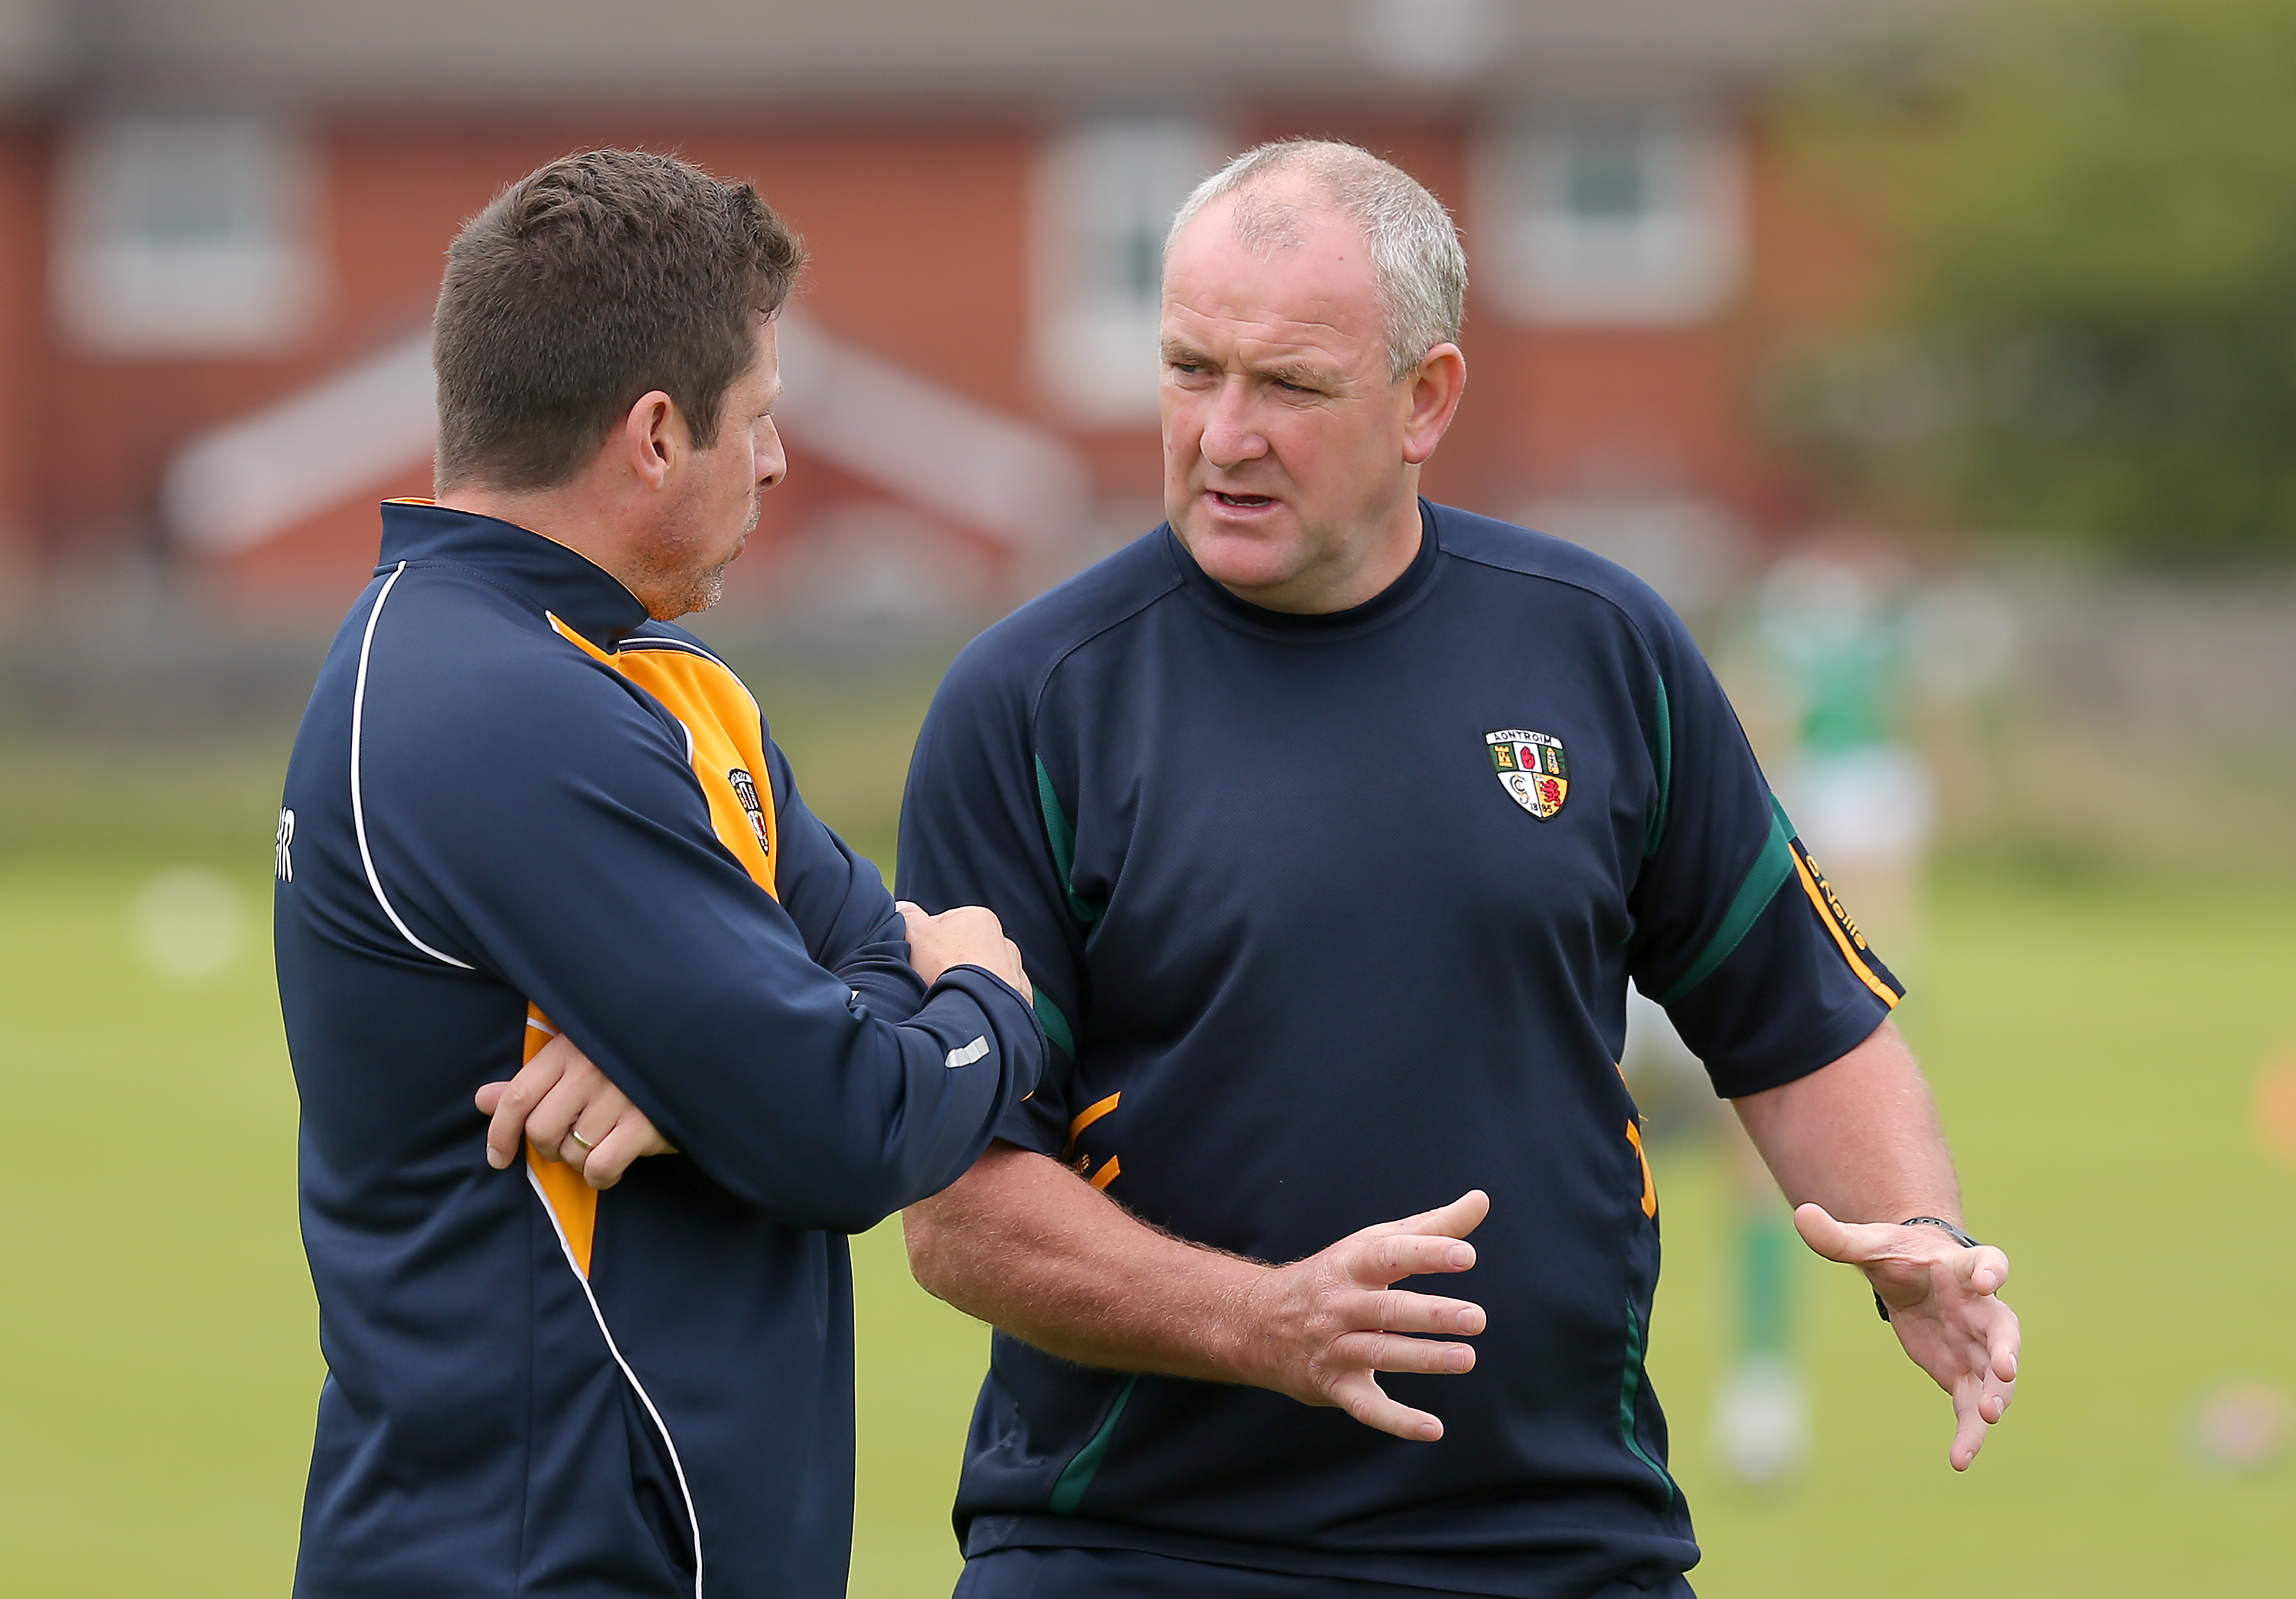 Antrim’s managers Gearoid Adams and Frank Fitzsimmons are hoping to continue on for 2017 despite the Saffrons bowing out of the Championship at the hands of Limerick last weekend 